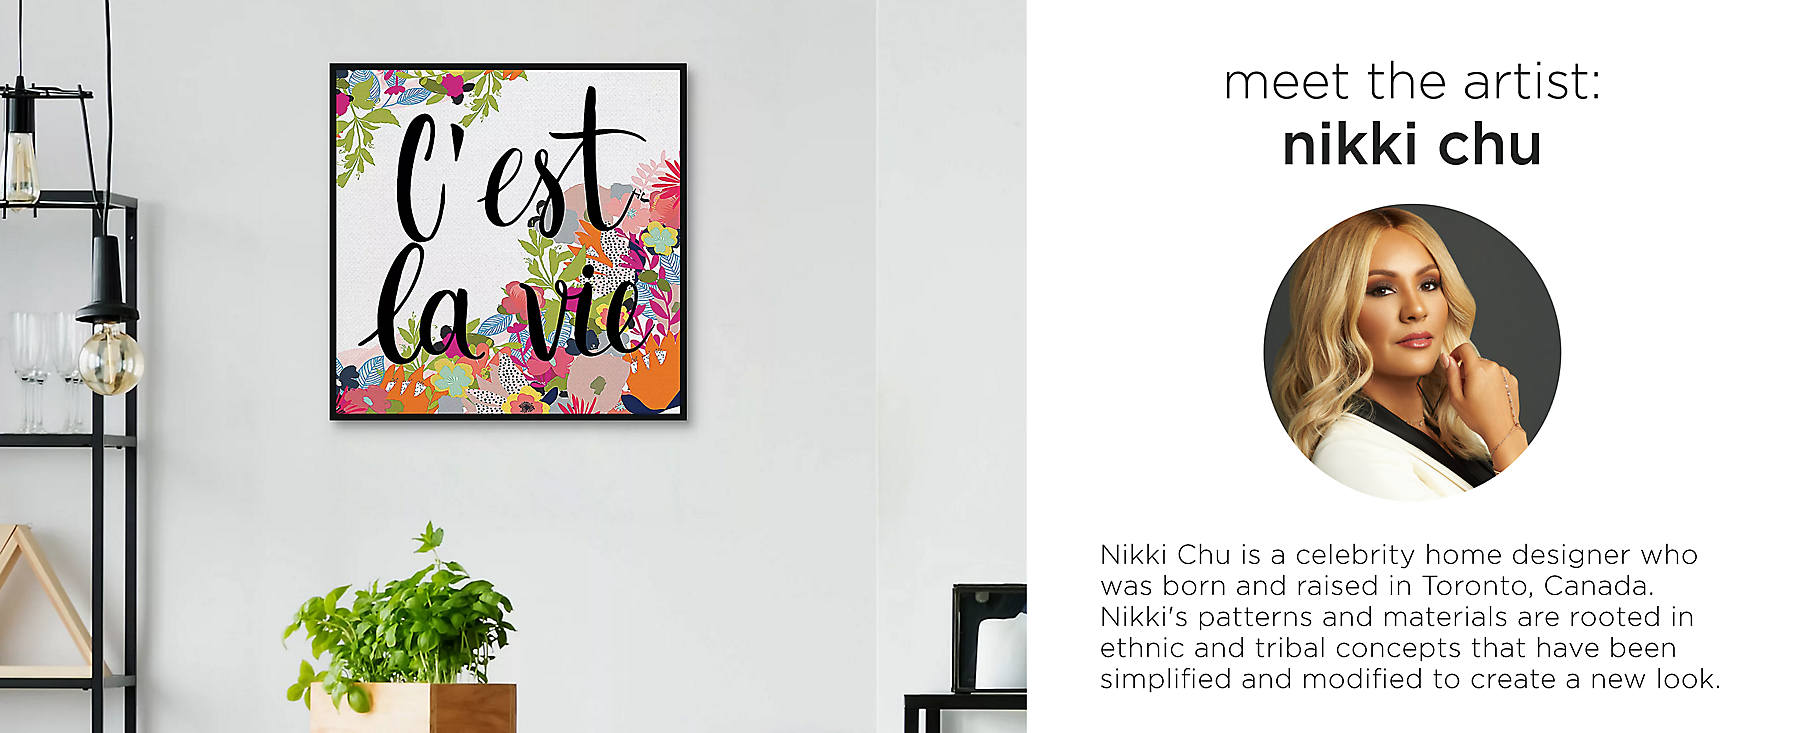 Meet the artist: Nikki Chu is a celebrity home designer who was born and raised in Toronto, Canada. Nikki's patterns and materials are rooted in ethnic and tribal concepts that have been simplified and modified to create a new look.